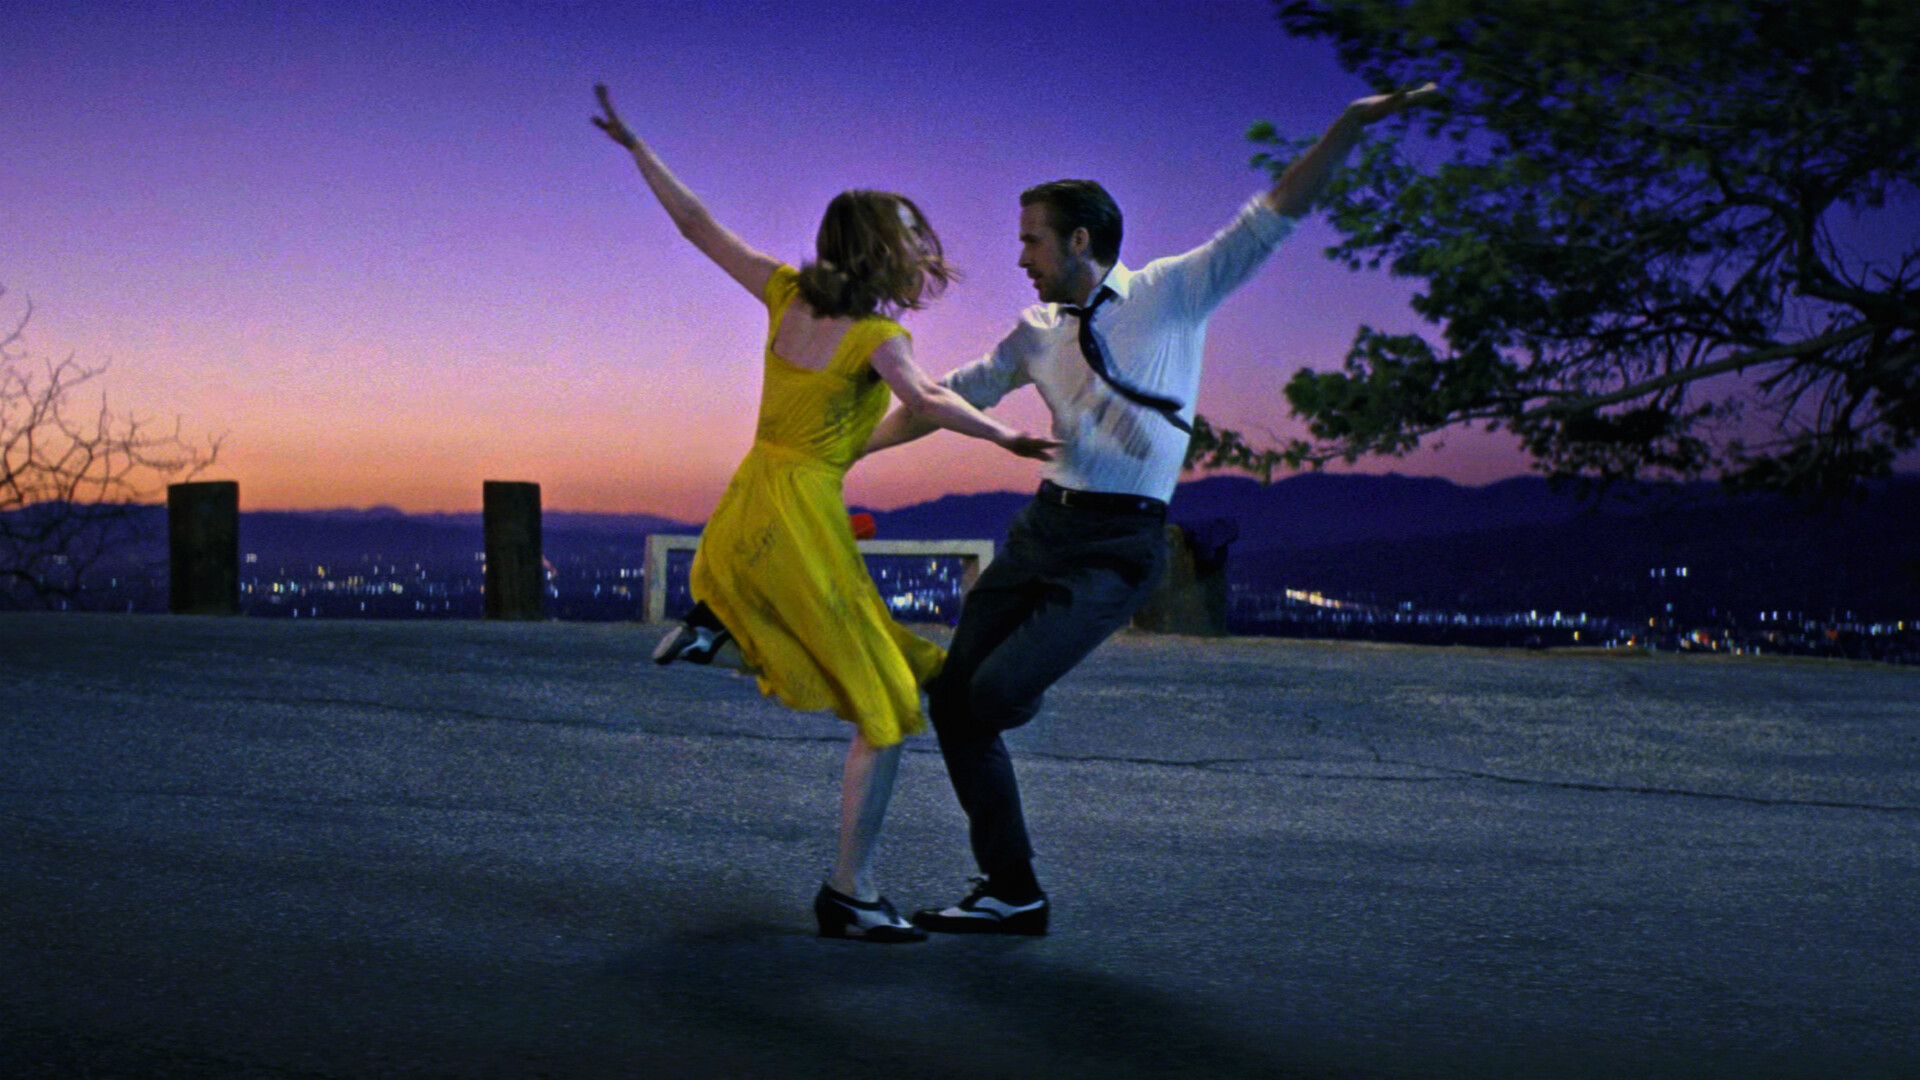 La La Land: Emma Stone and Ryan Gosling dancing in Griffith Park, Musical by Damien Chazelle. 1920x1080 Full HD Background.